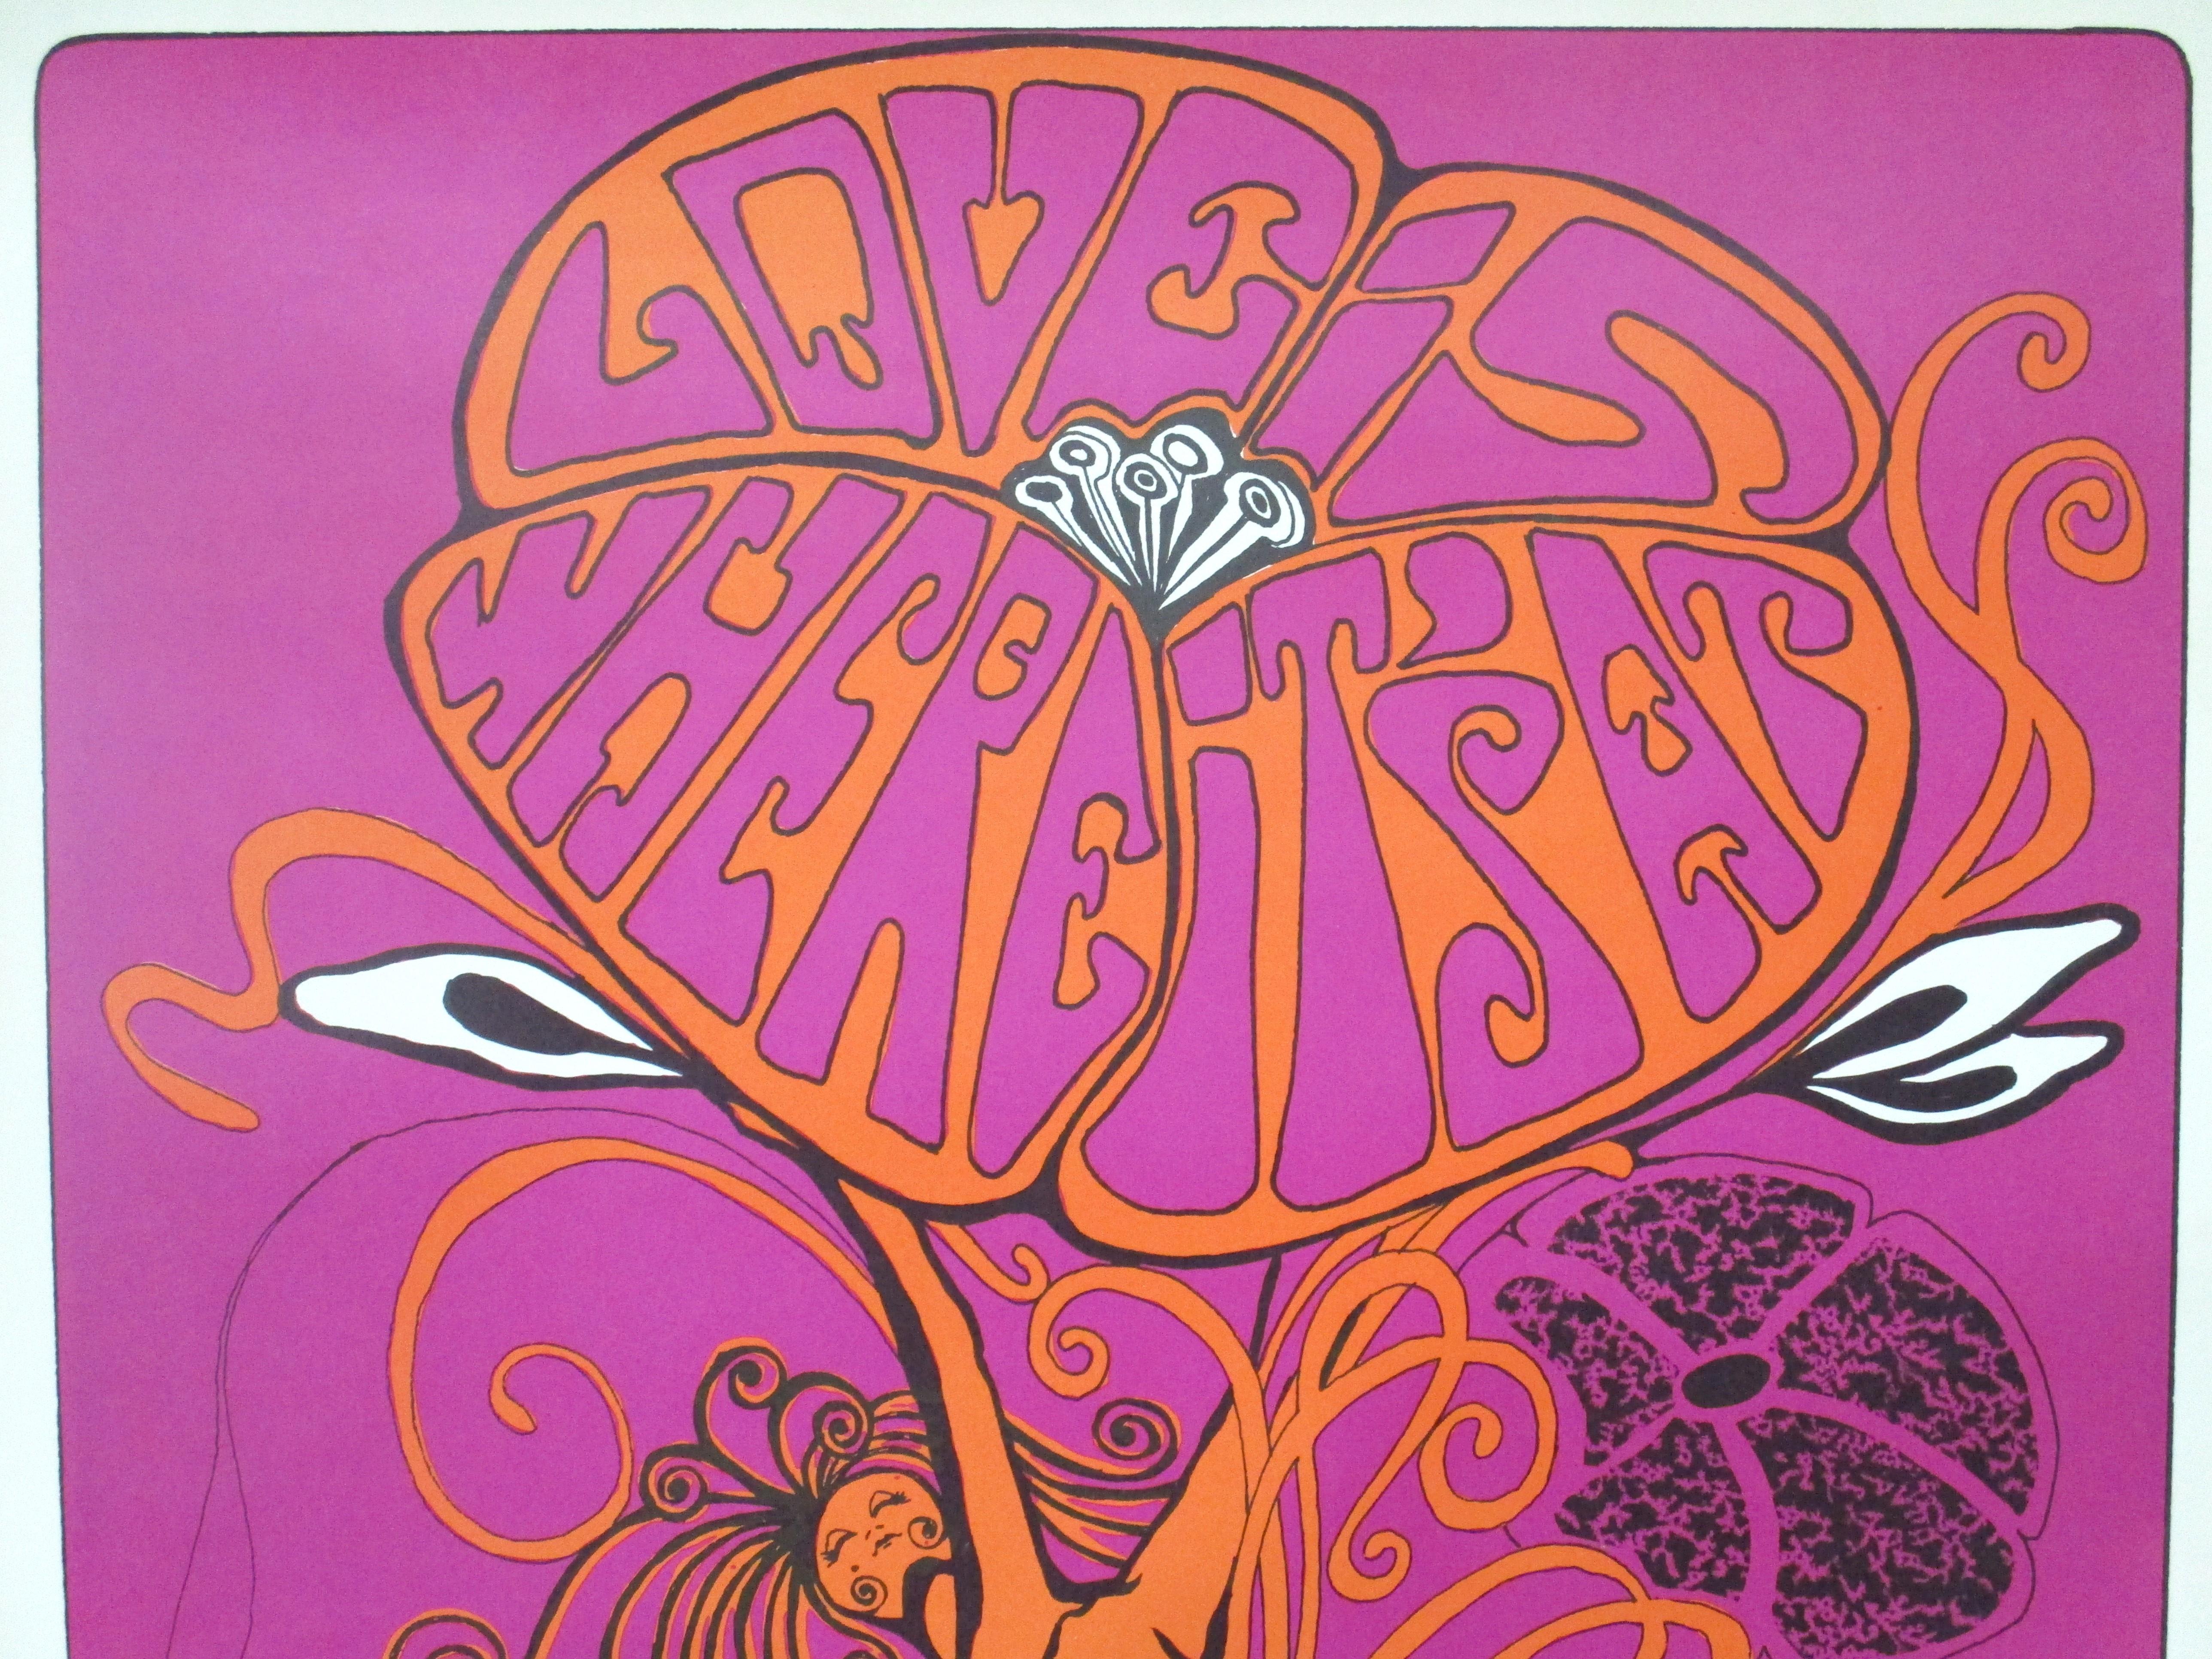 A colorful and bright vintage psychedelic poster declaring 